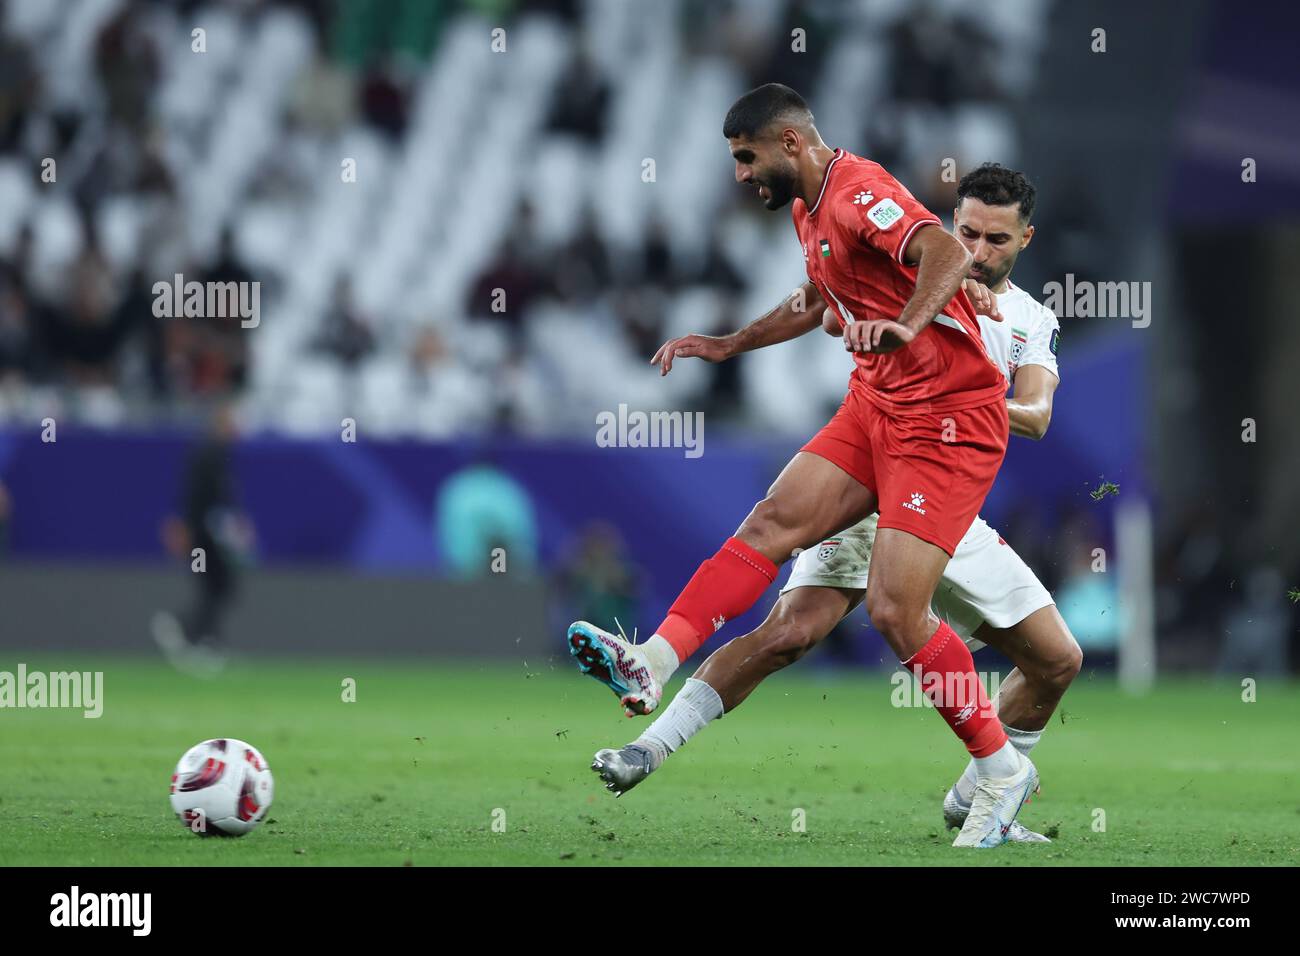 AL RAYYAN, QATAR - JANUARY 14: players of Iran Saman Ghoddos and Palestine in action during the AFC Asian Cup Group C match between Iran and Palestine at Education City Stadium on January 14, 2024 in Al Rayyan, Qatar. Photo SFSI Credit: Sebo47/Alamy Live News Stock Photo